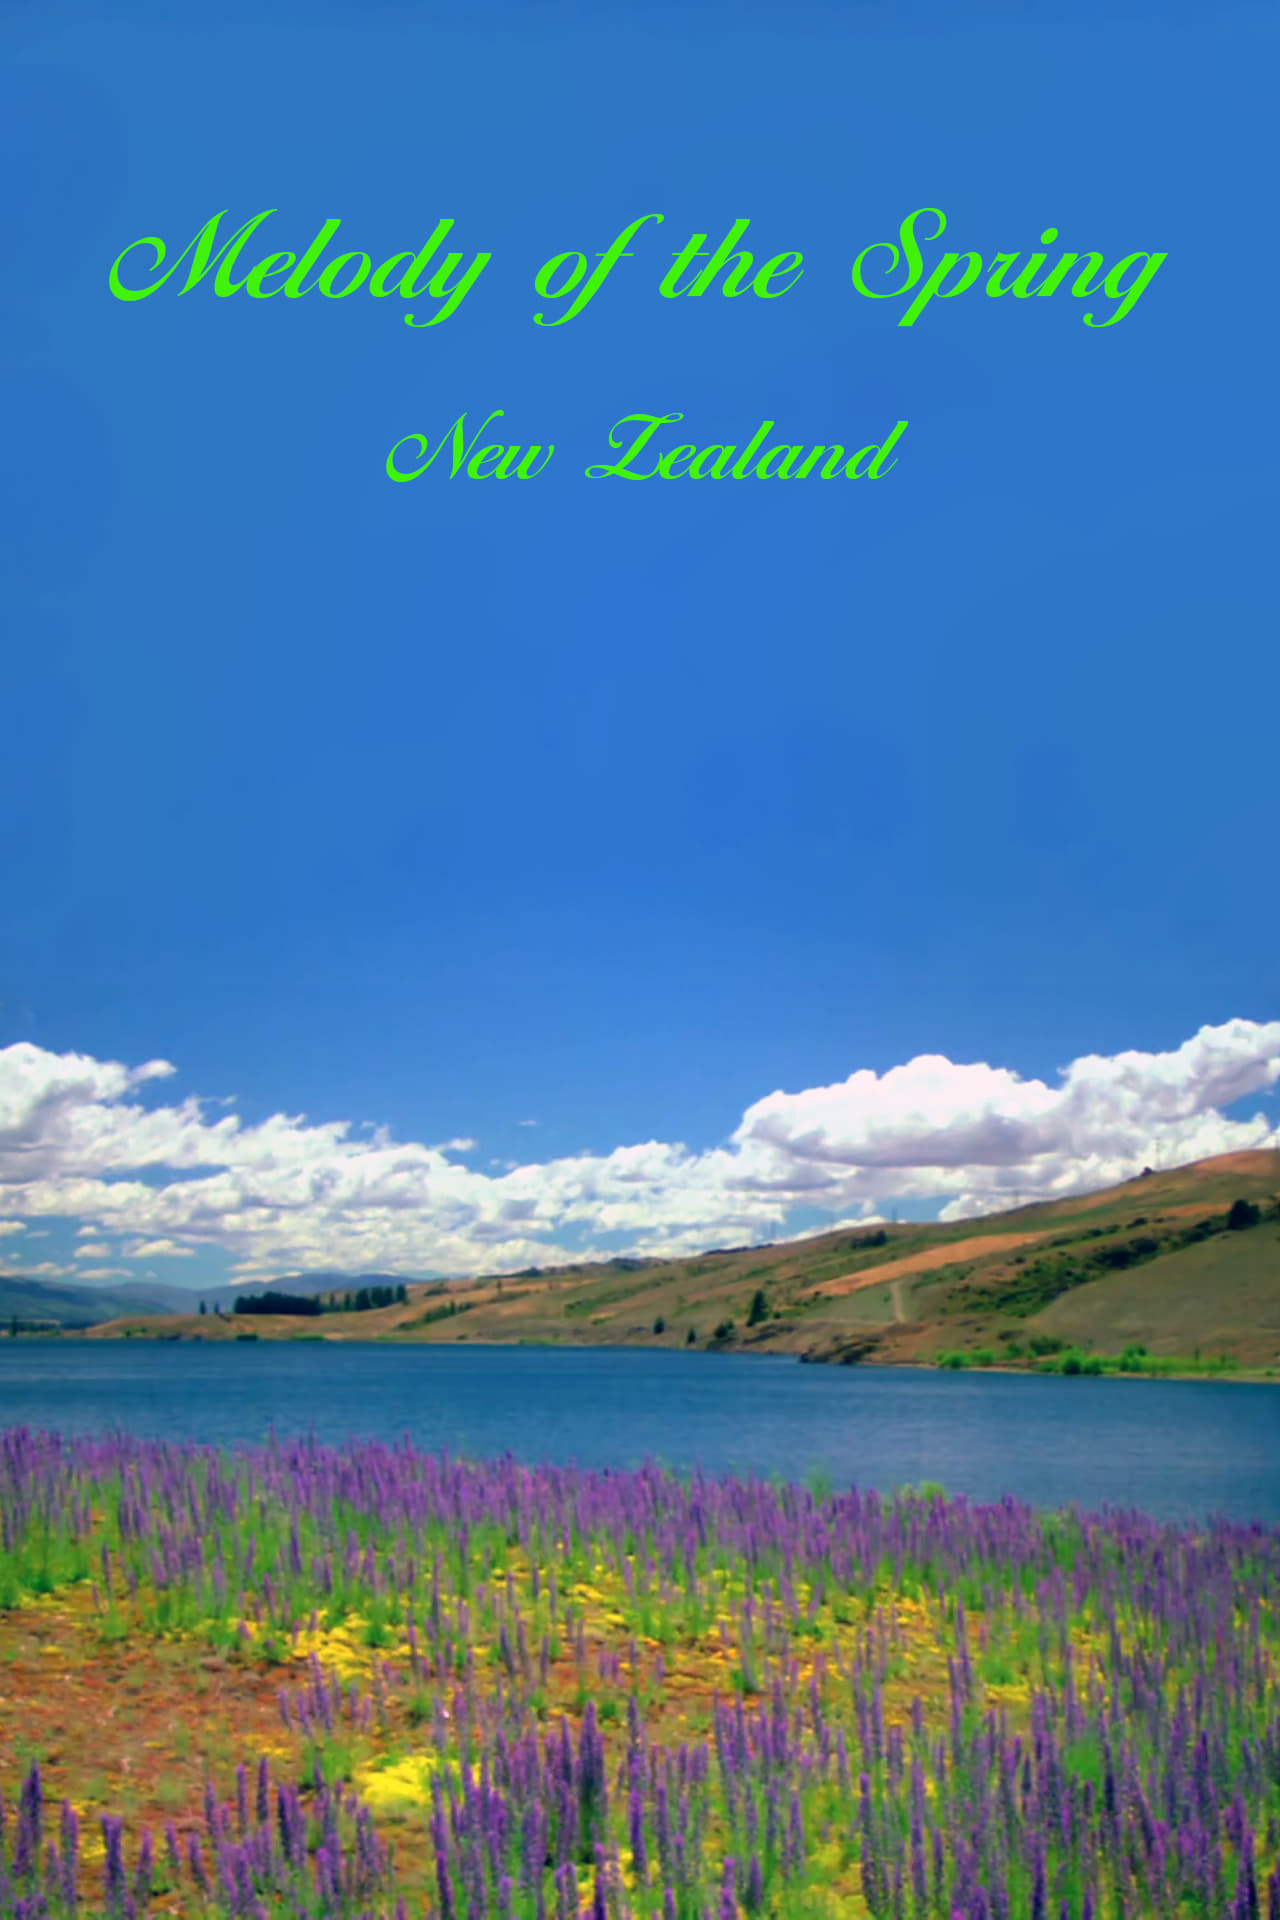 Melody of the Spring - New Zealand